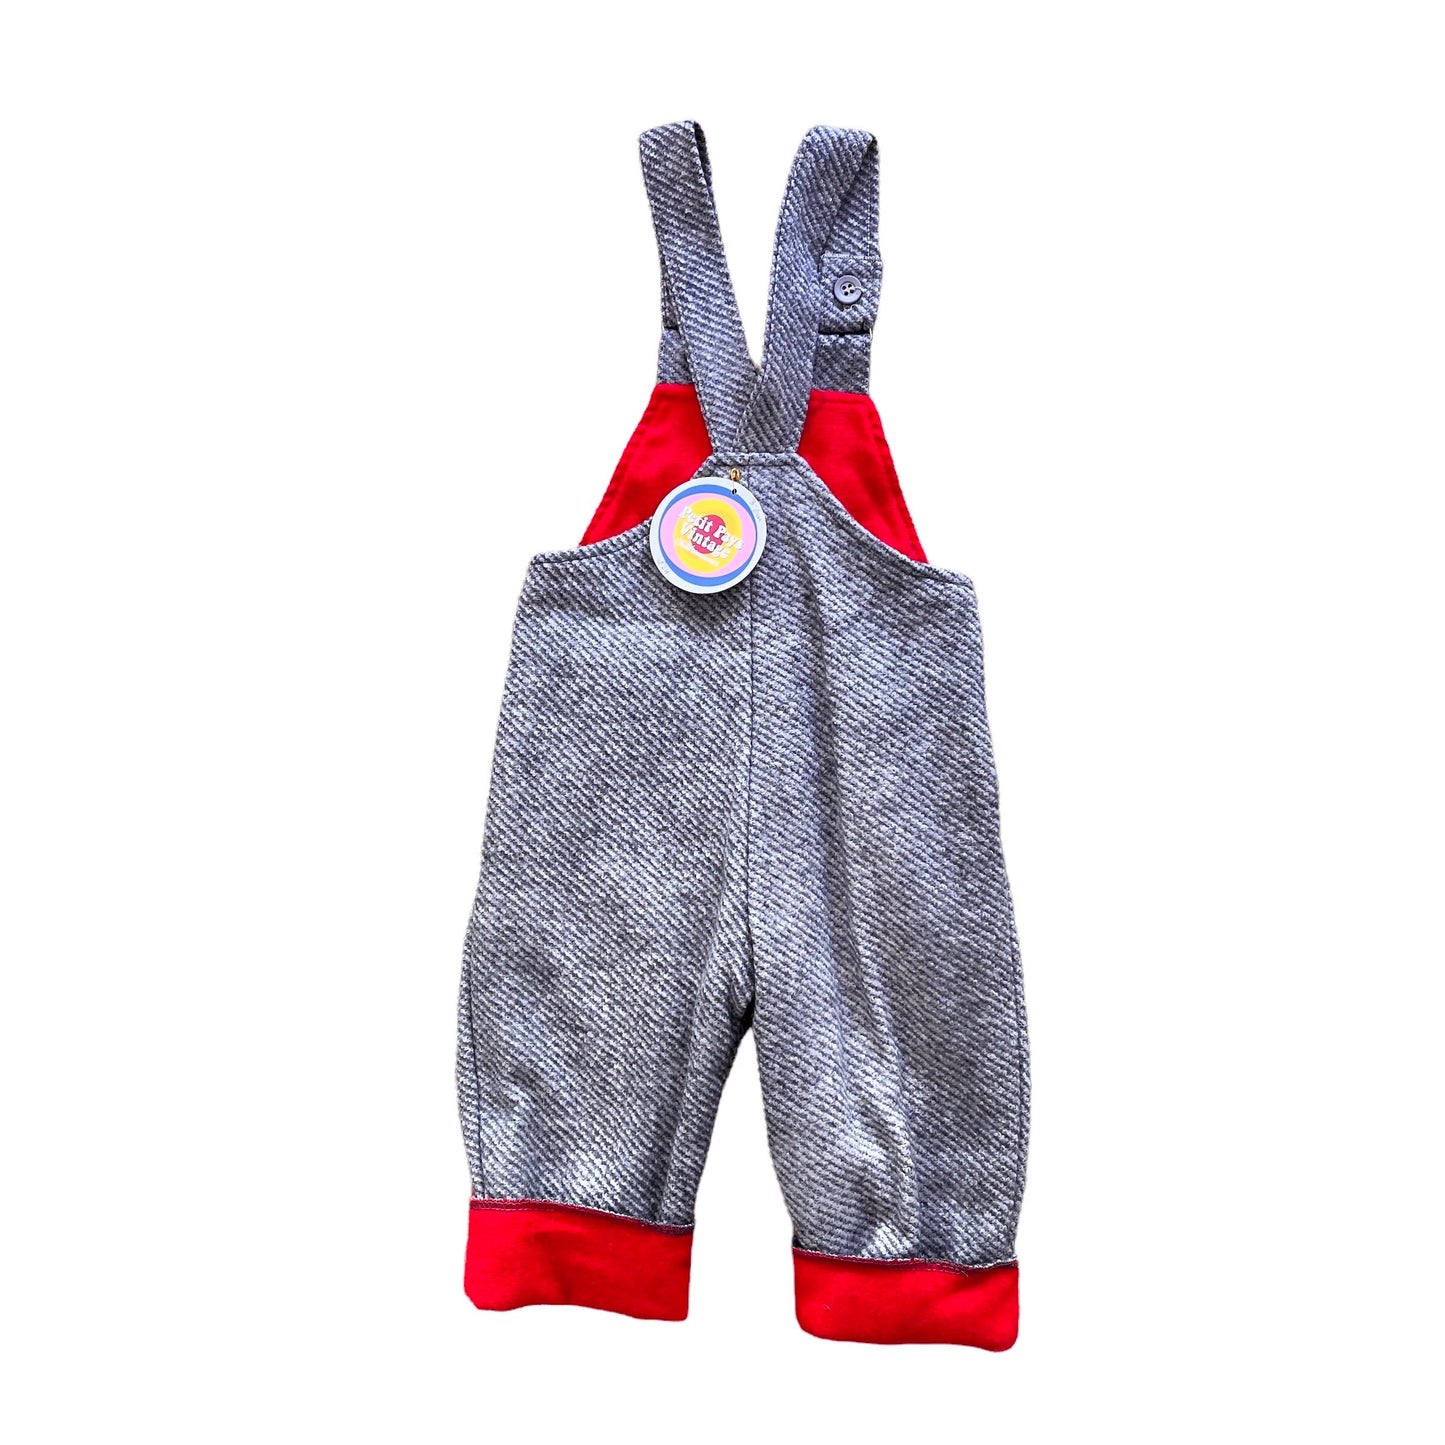 Vintage 1970s Grey / Red Dungarees 9-12 Months